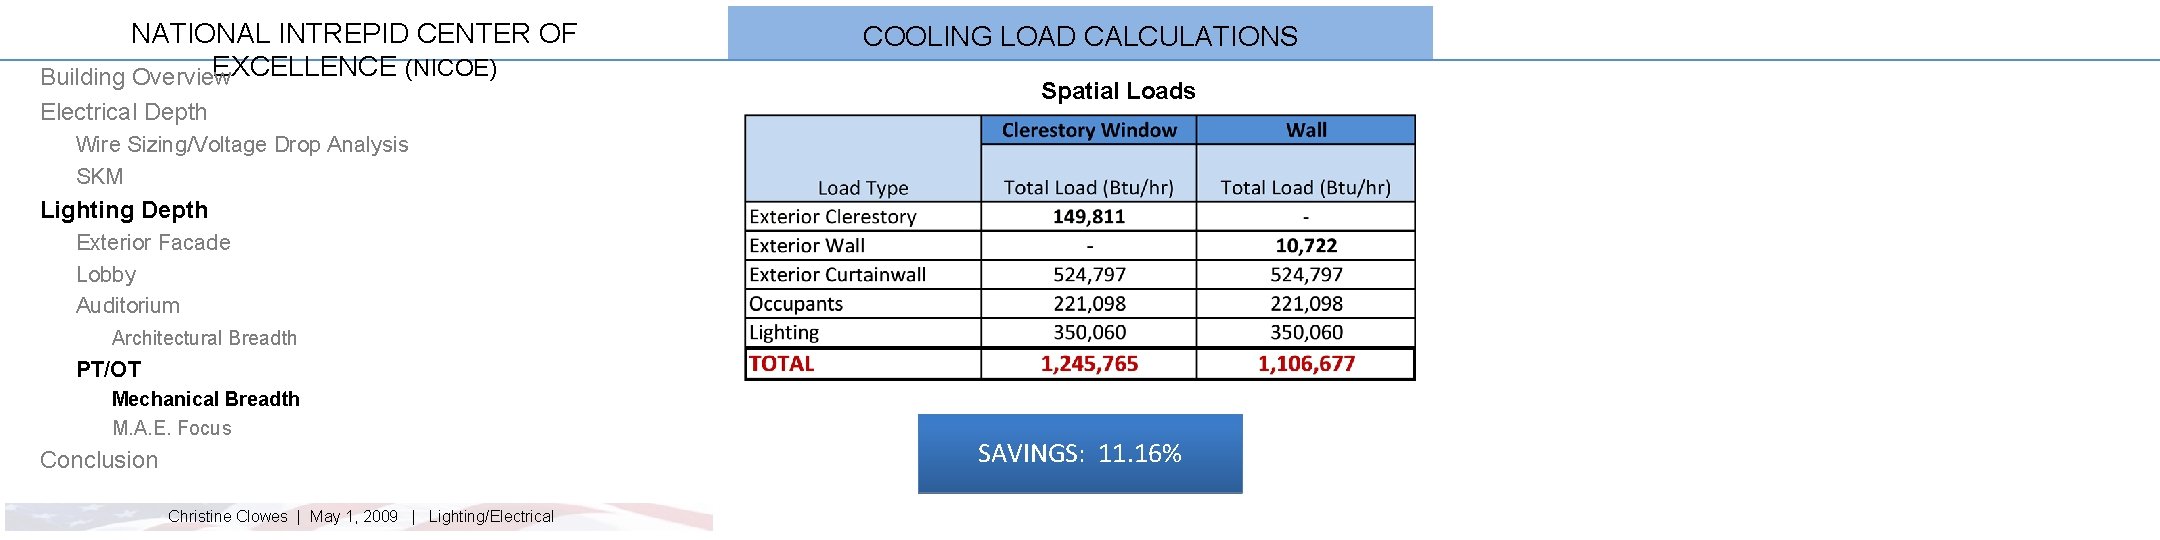 NATIONAL INTREPID CENTER OF EXCELLENCE (NICOE) Building Overview Electrical Depth COOLING LOAD CALCULATIONS Spatial